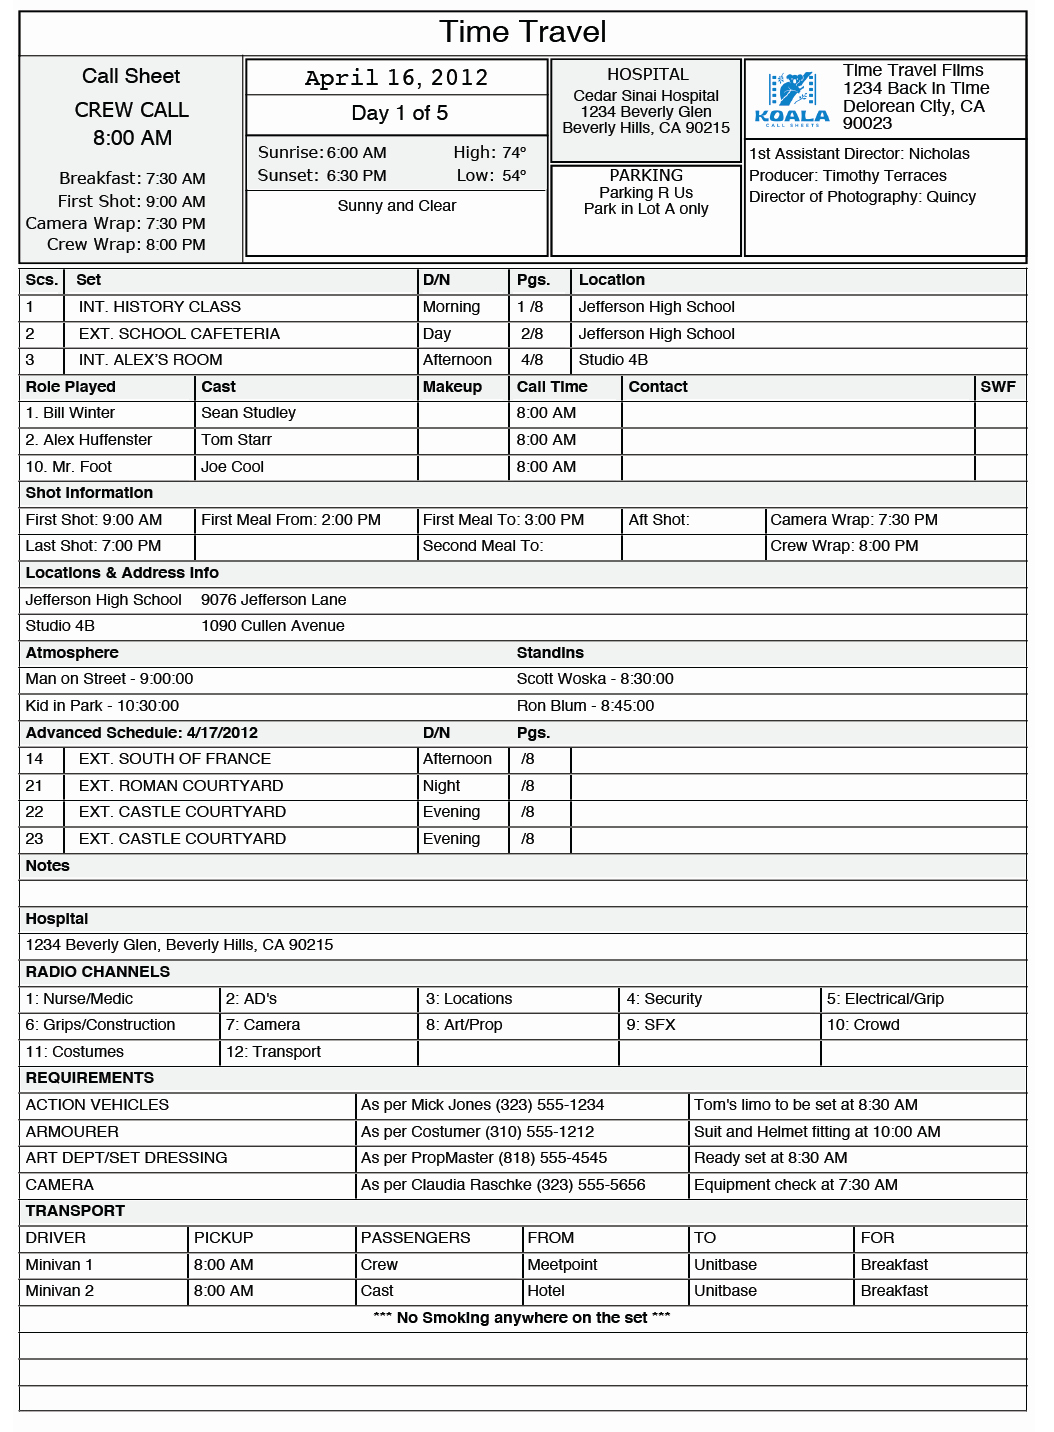 Film Call Sheet Template Best Of Free Call Sheet Template In Excel